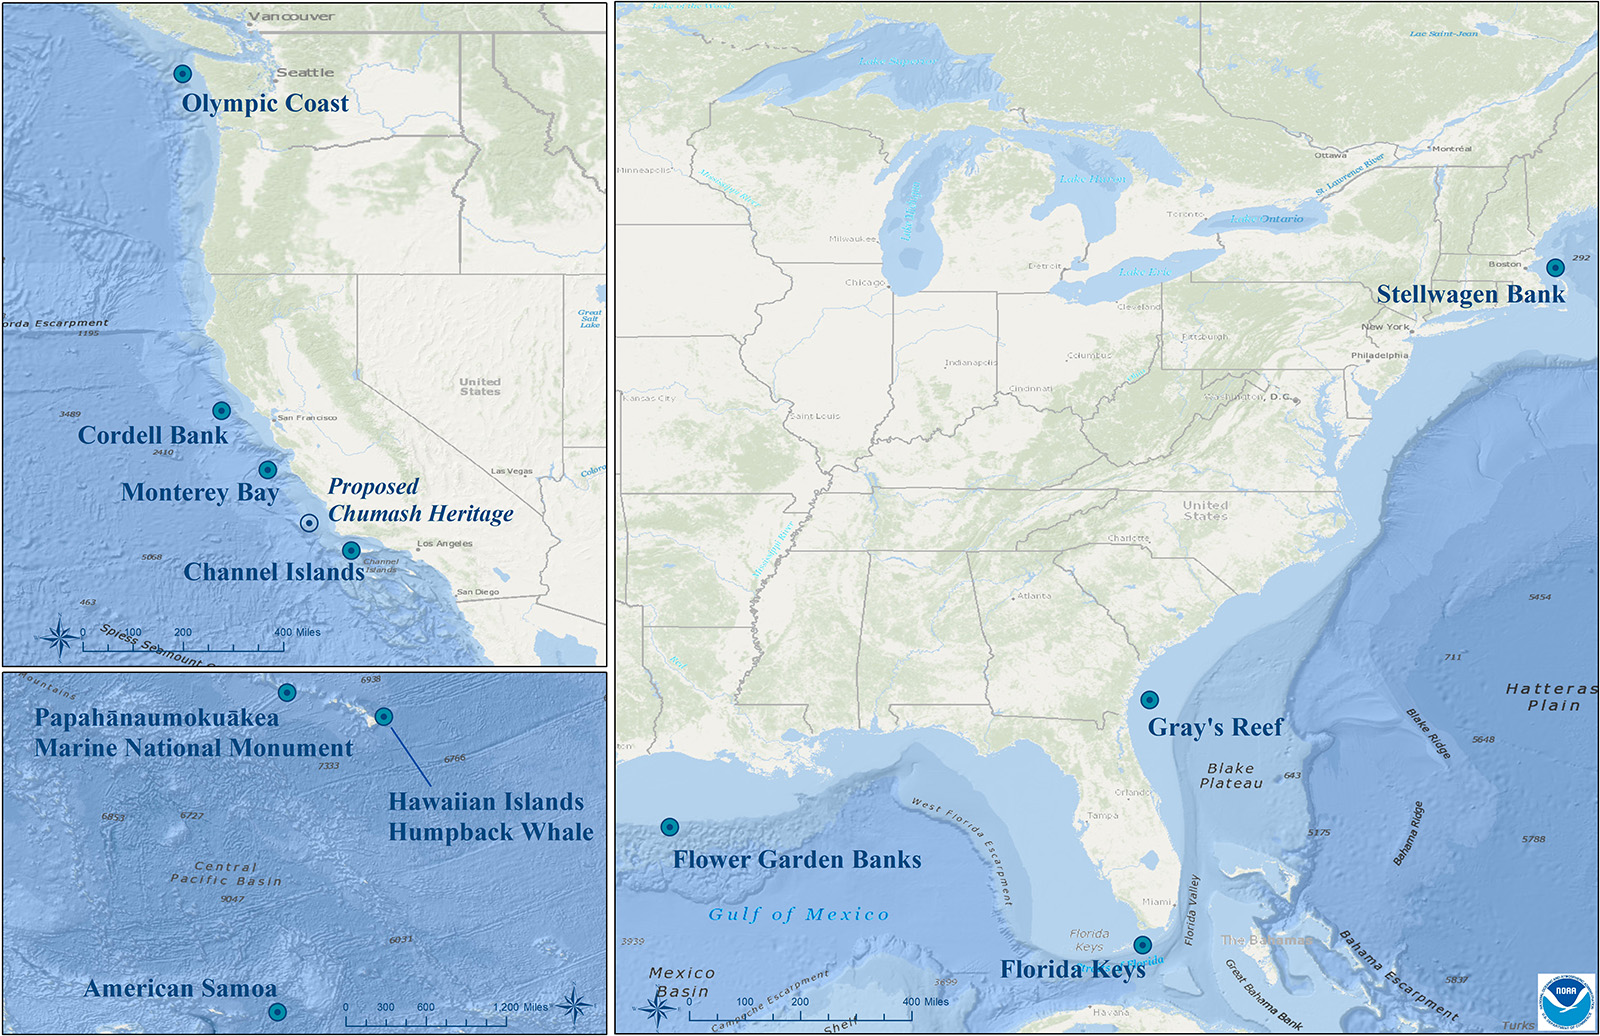 maps highlighting the locations of sound monitoring: Stellwagen Bank, Gray's Reef, Florida Keys, Flower Garden Banks, Olympic Coast, Cordell Bank, Monterey Bay, Channel Islands, and Hawaiian Islands Humpback Whale National Marine Sanctuaries, the proposed Chumash Heritage National Marine Sanctuary and, and areas of the Papahānaumokuākea Marine National Monument